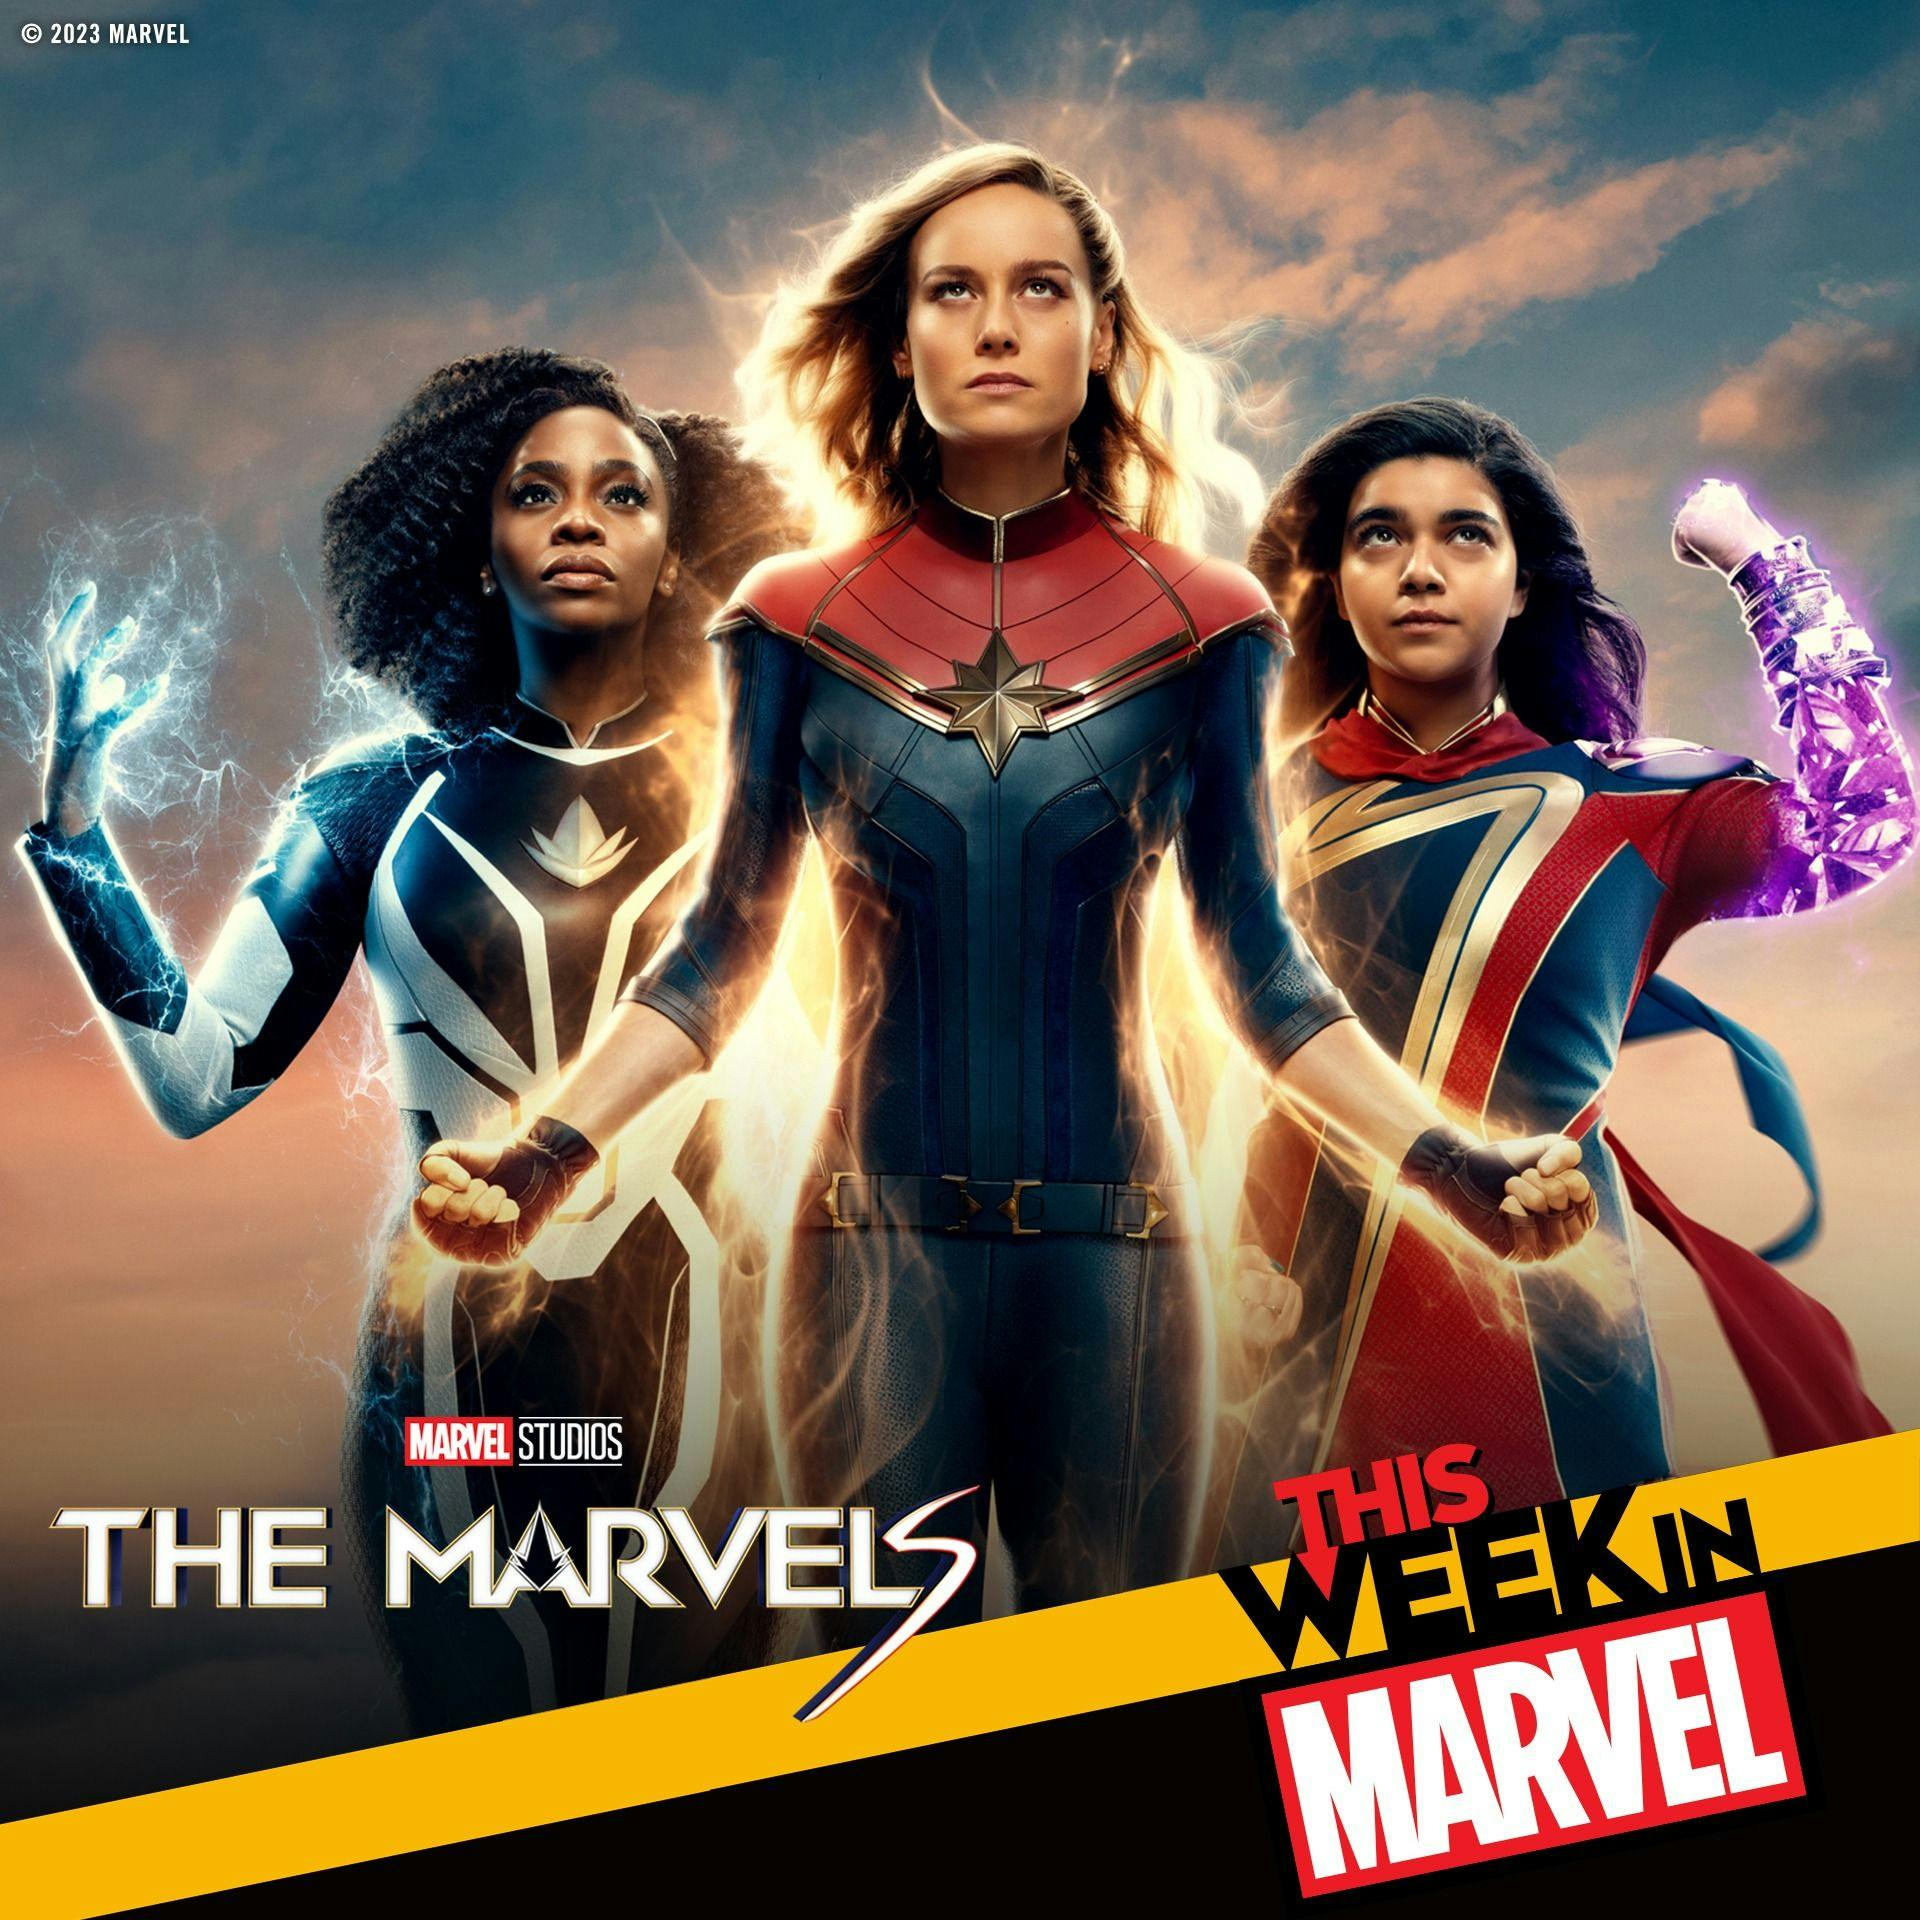 The Marvels Premiere, Loki Season Finale, Carnage Returns, Echo Updates, and more!